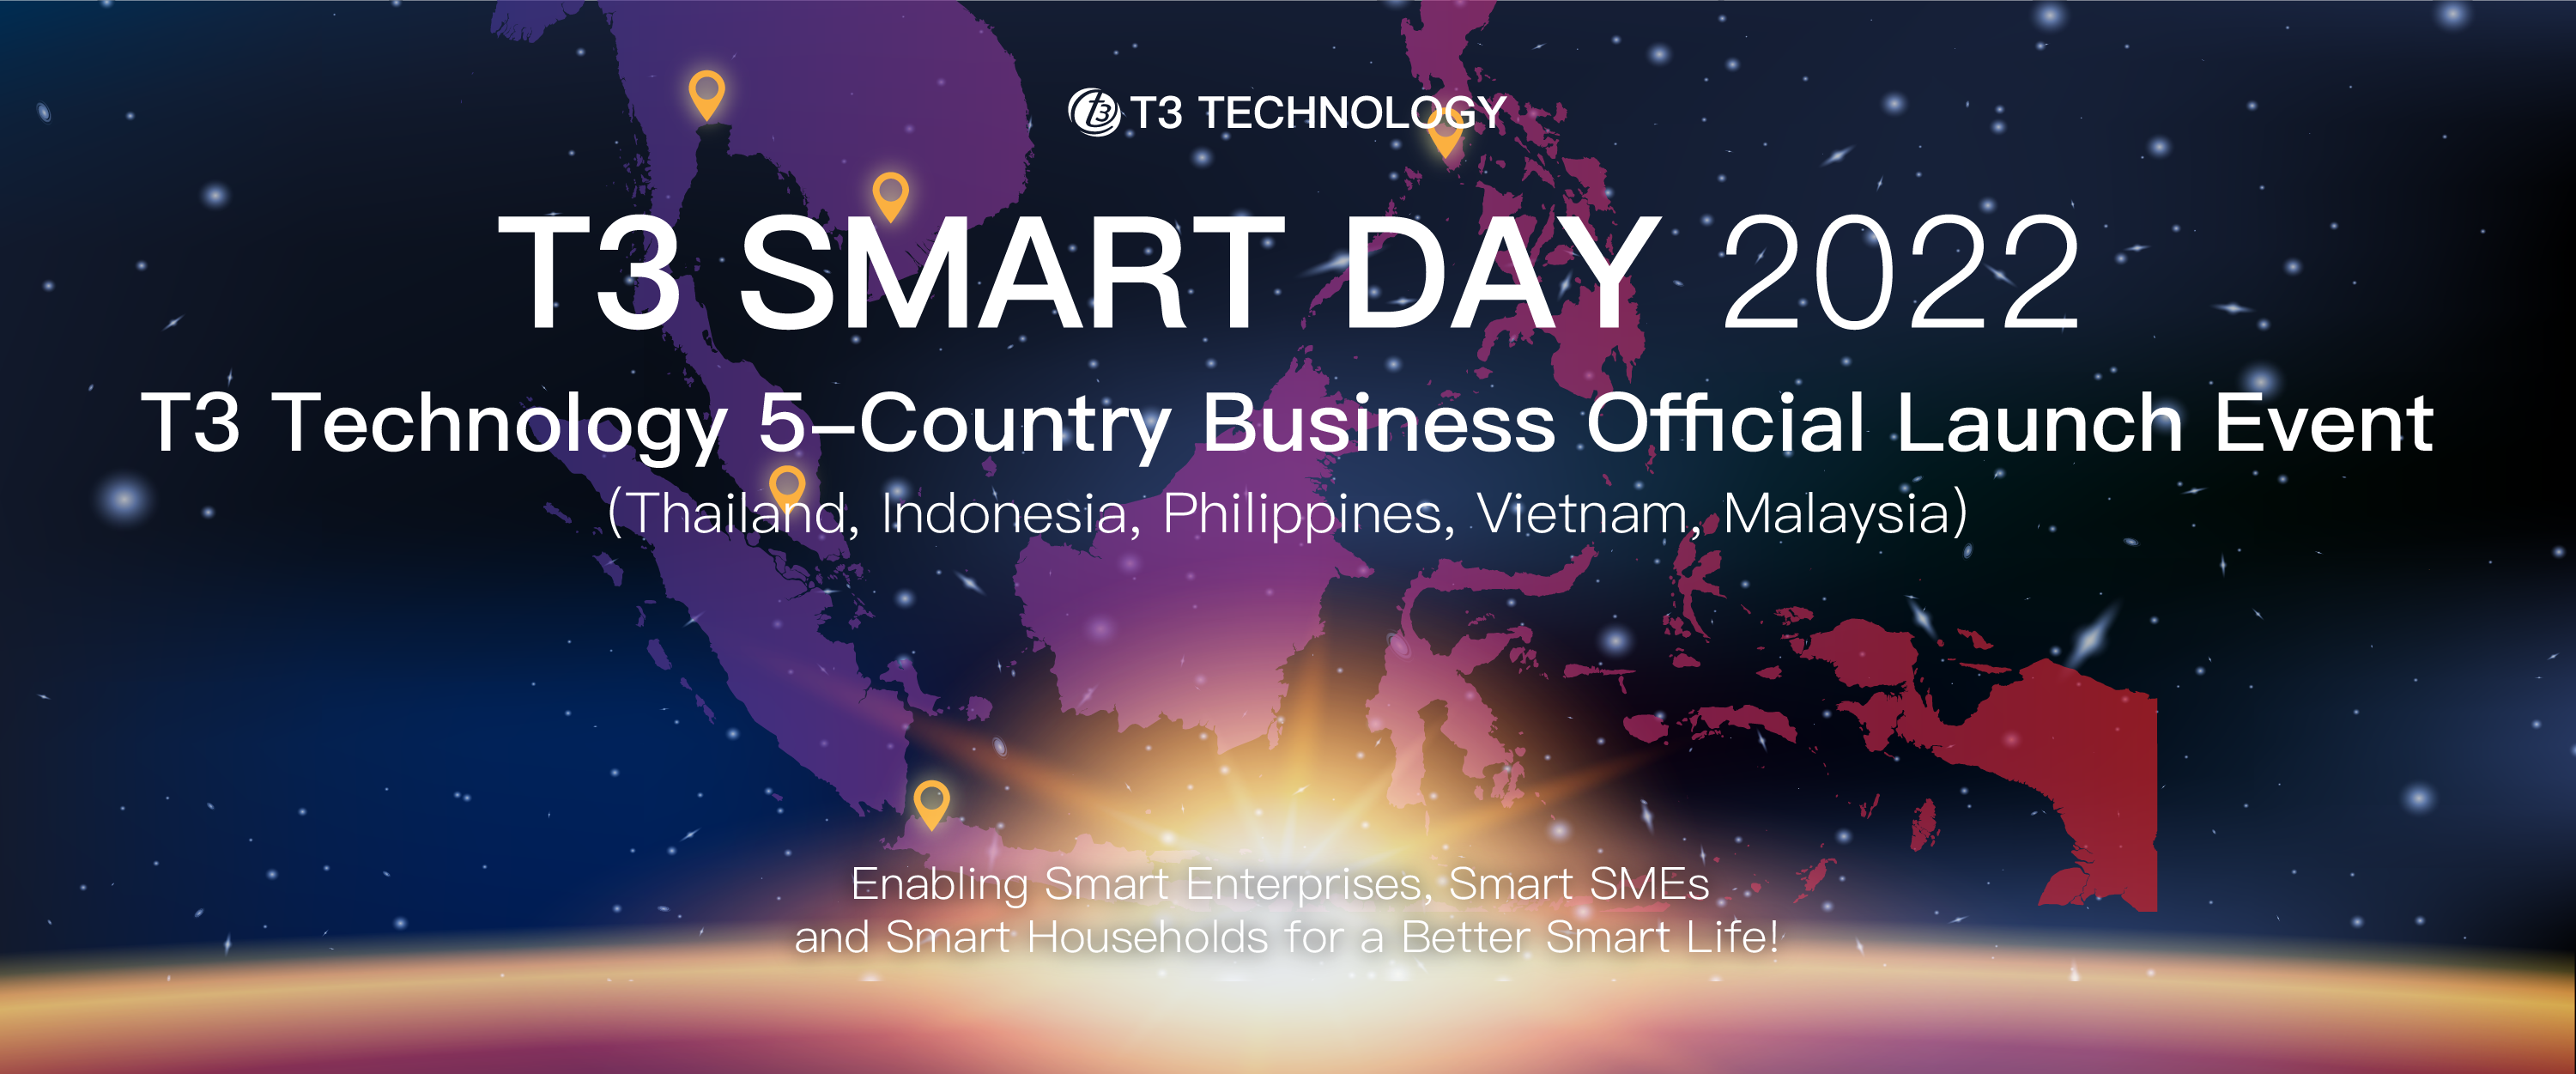 T3 Smart Day 2022